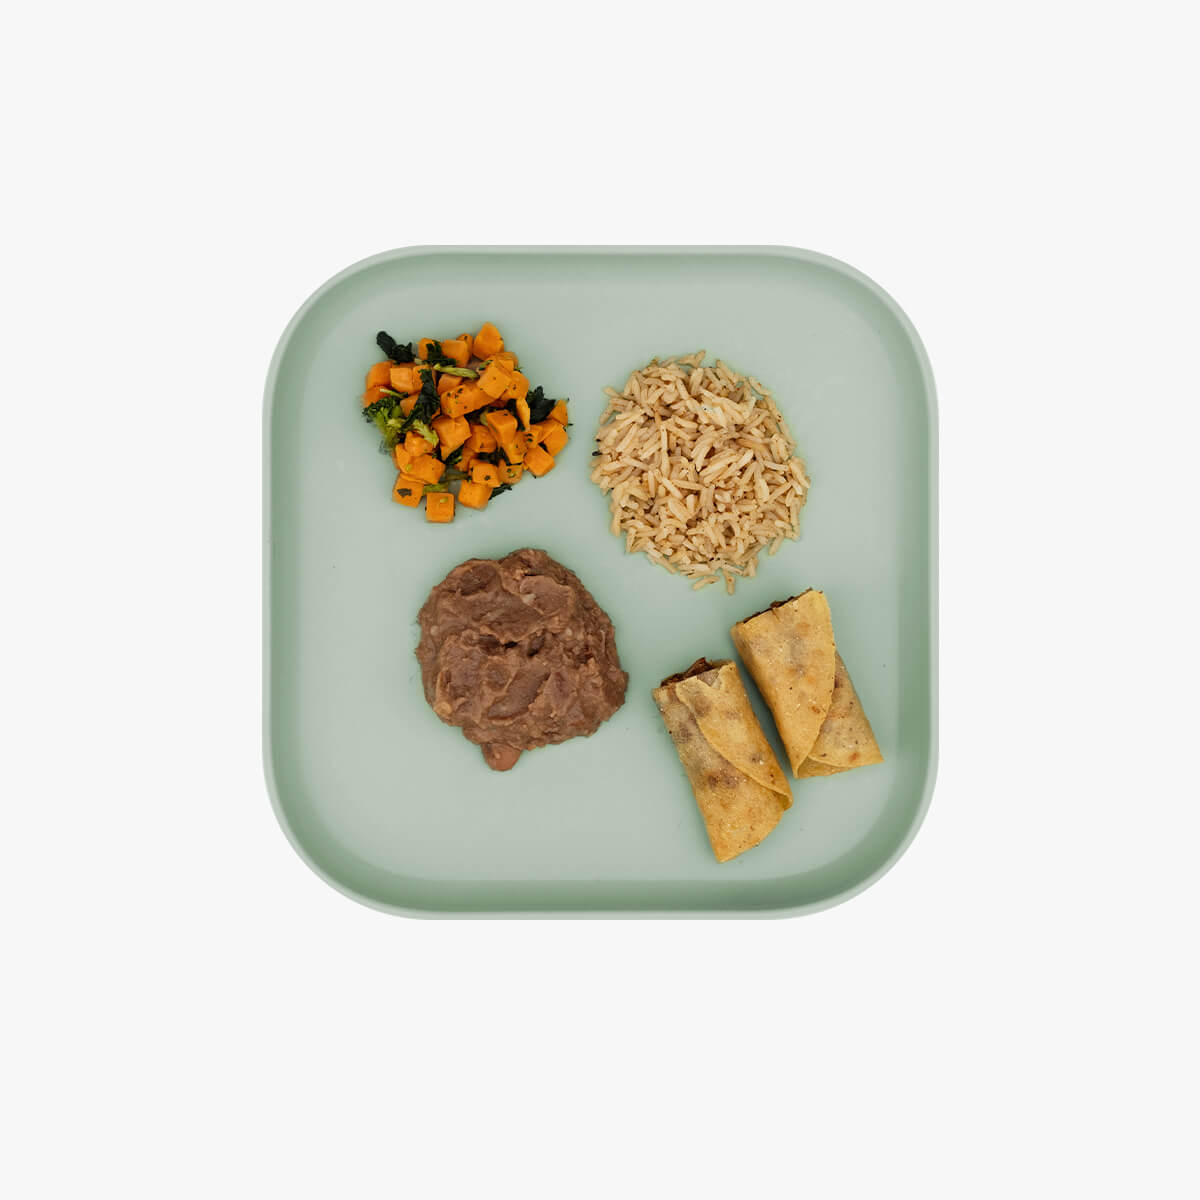 Mealtime Plate in Sage / ezpz Basics Line / Stylish, Durable Plates for Big Kids